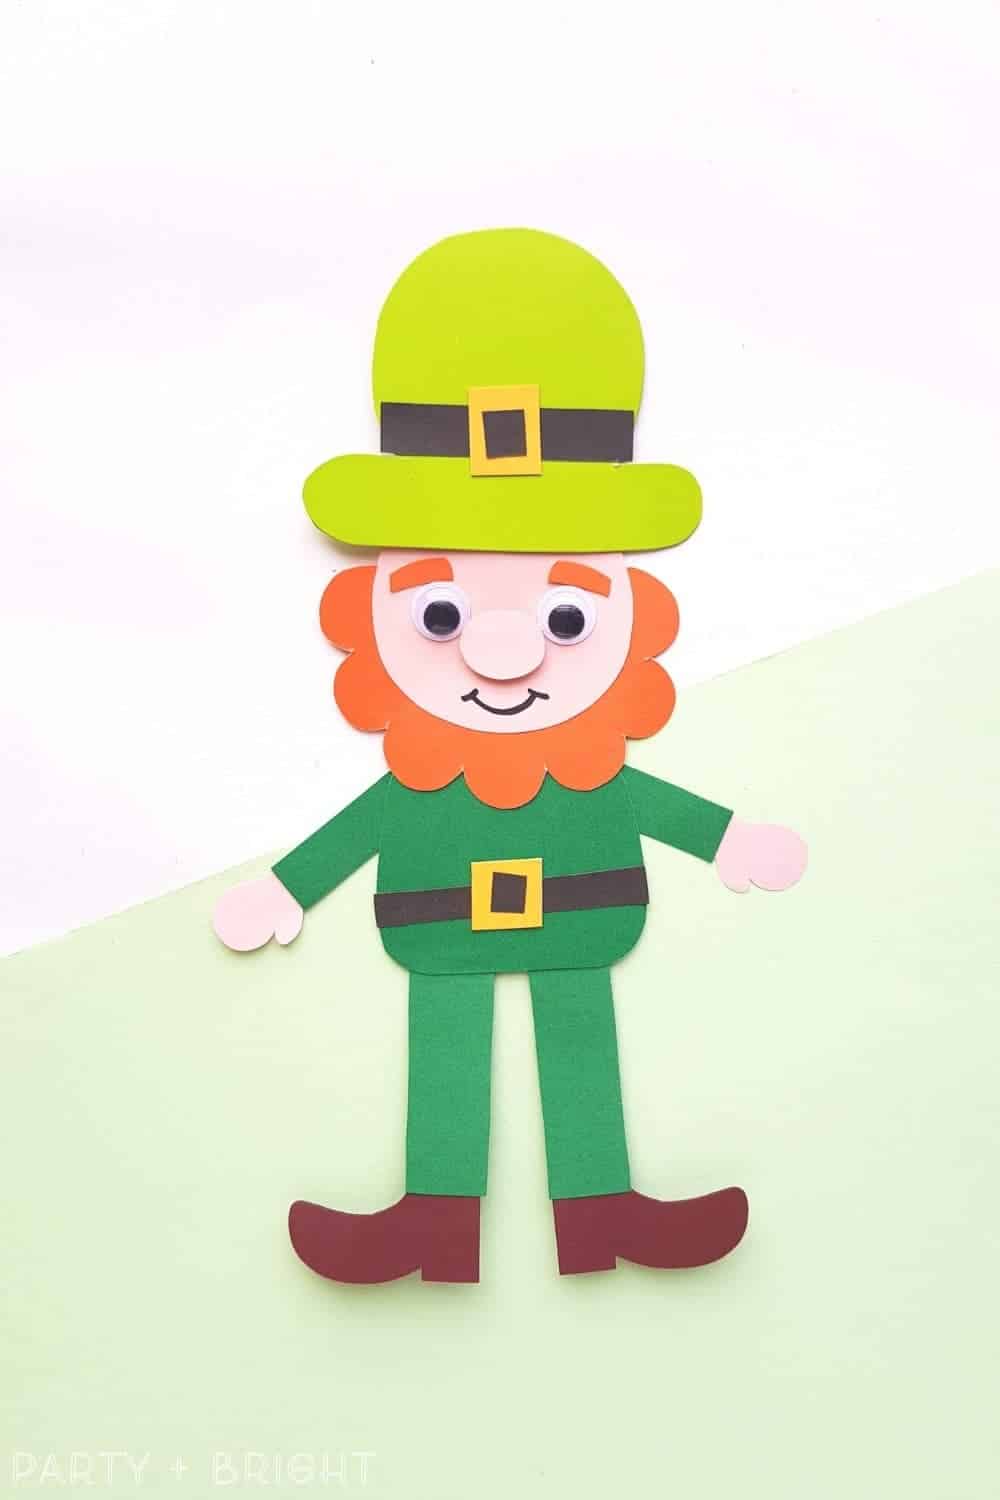 Free Printable Leprechaun Template + Easy St. Patrick's Day Paper Craft